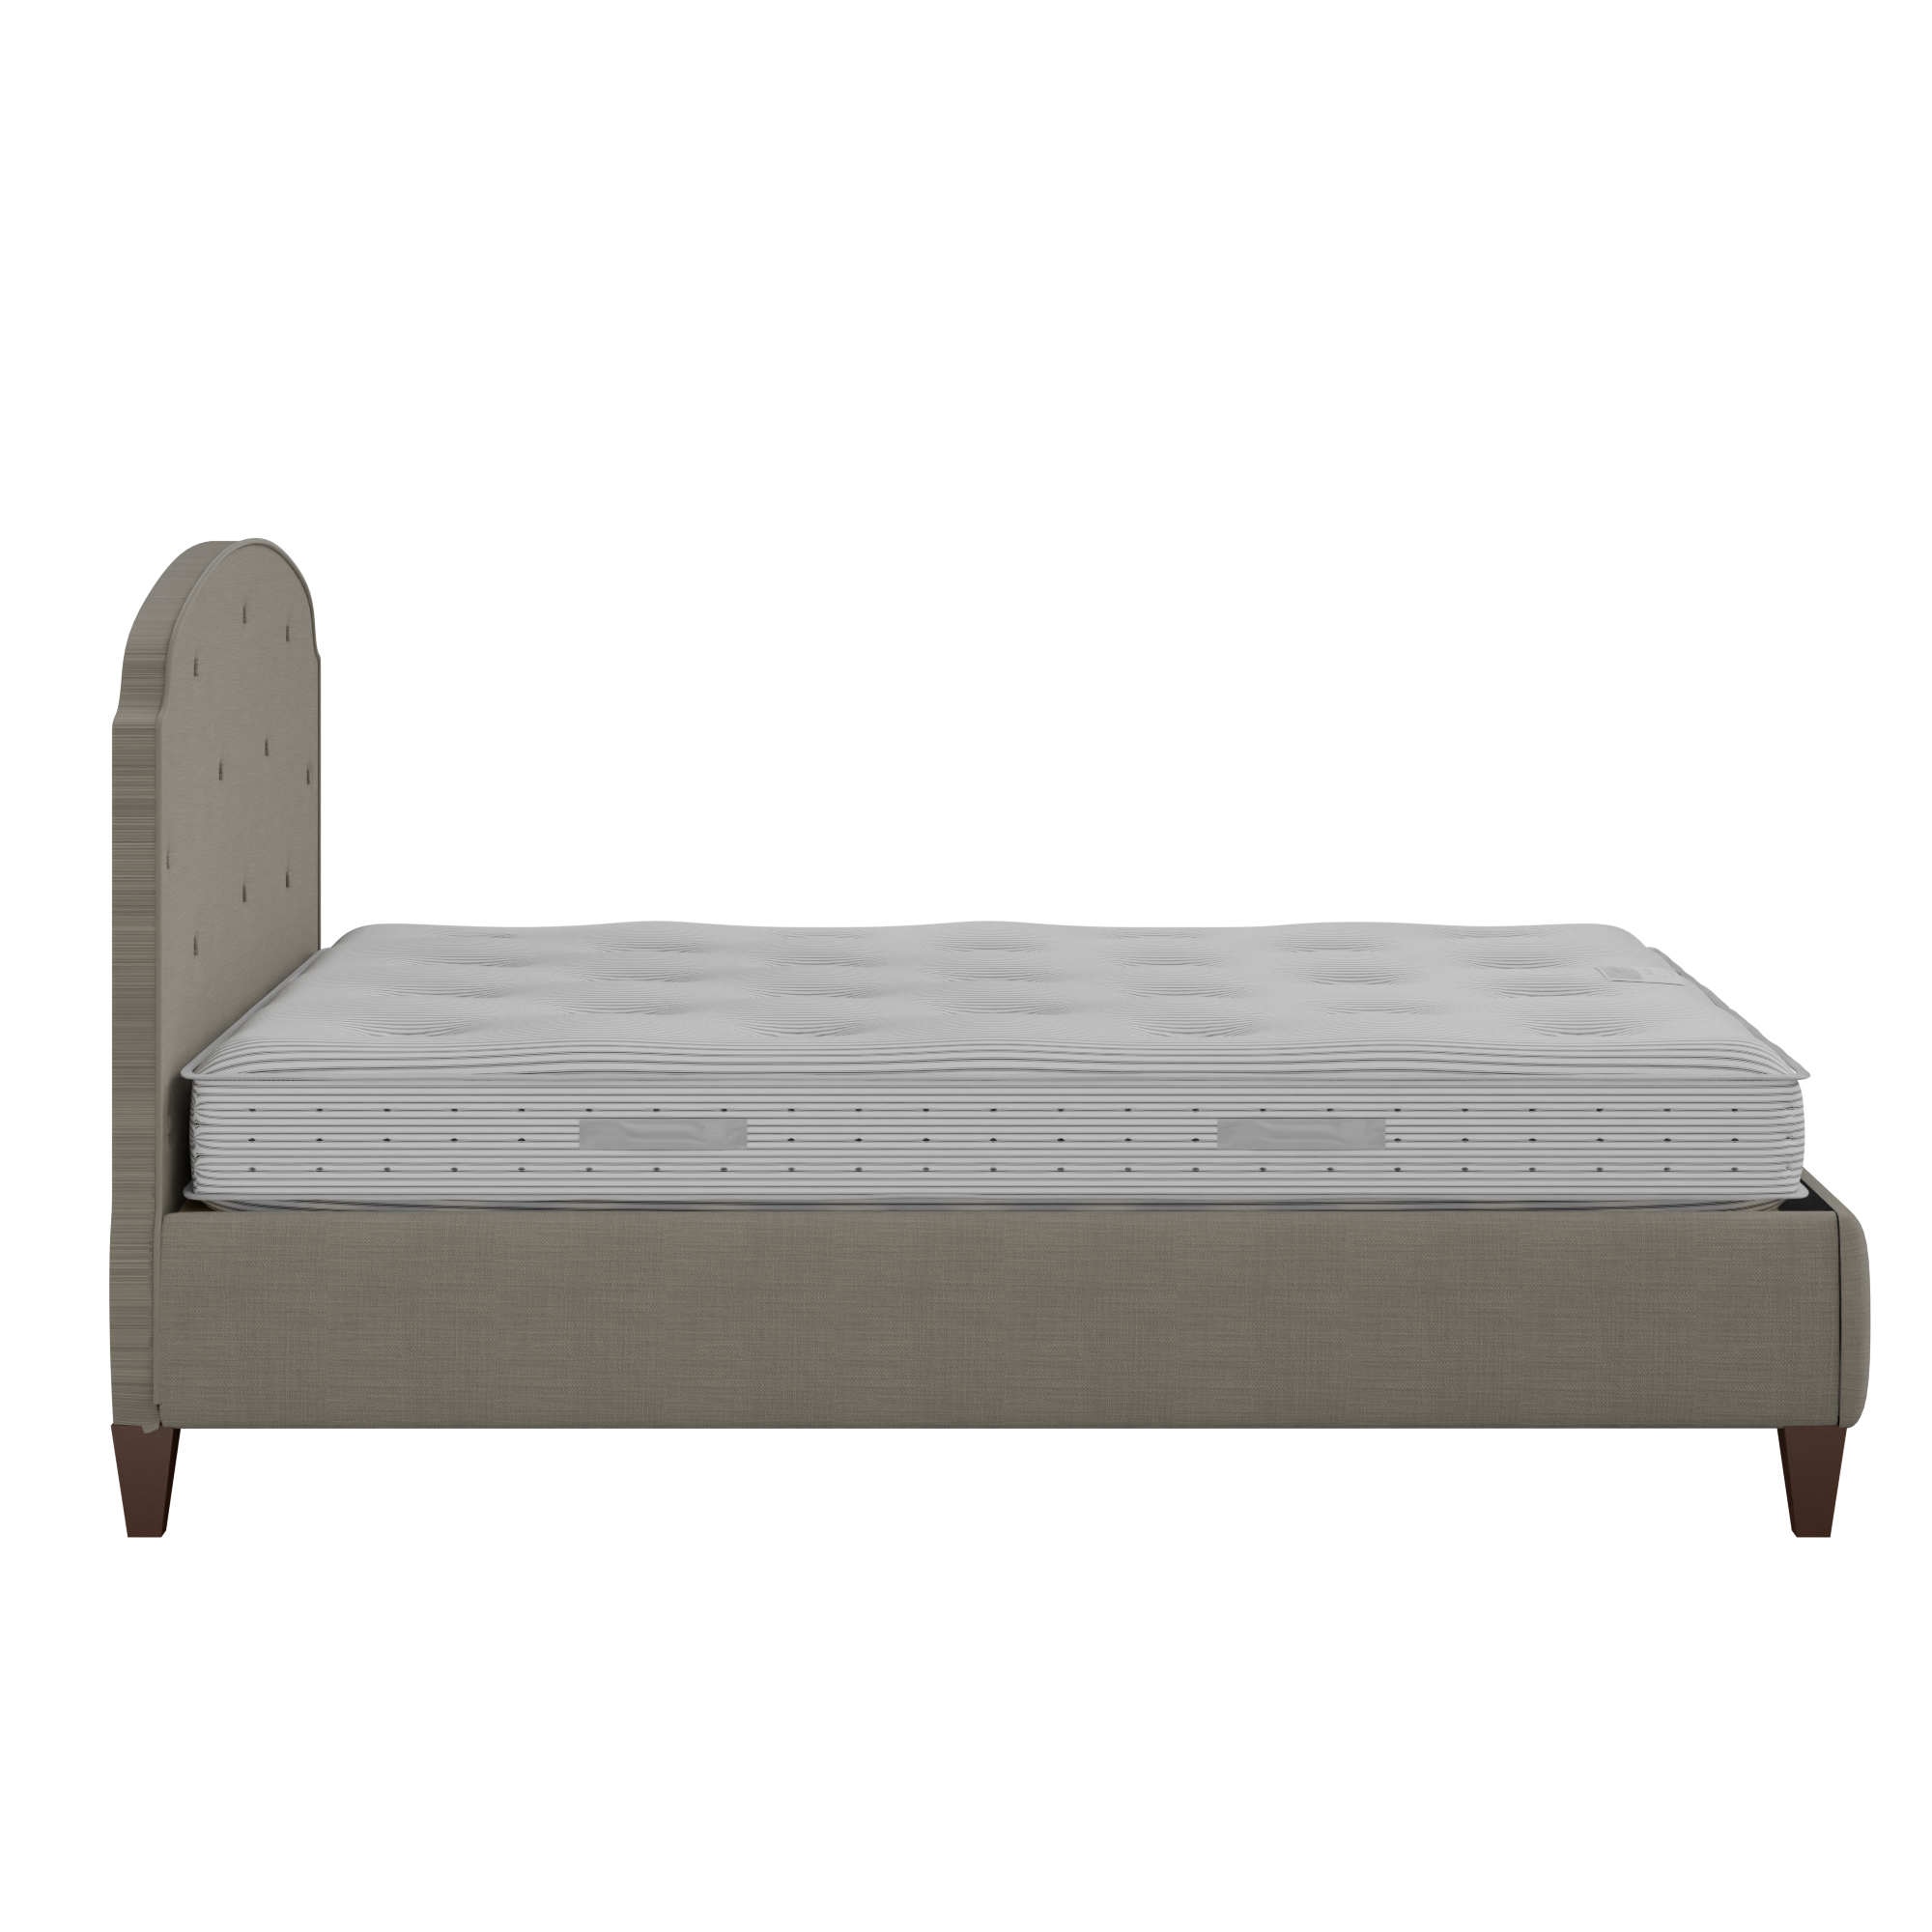 Lide Buttoned Diagonal upholstered bed in grey fabric with Juno mattress